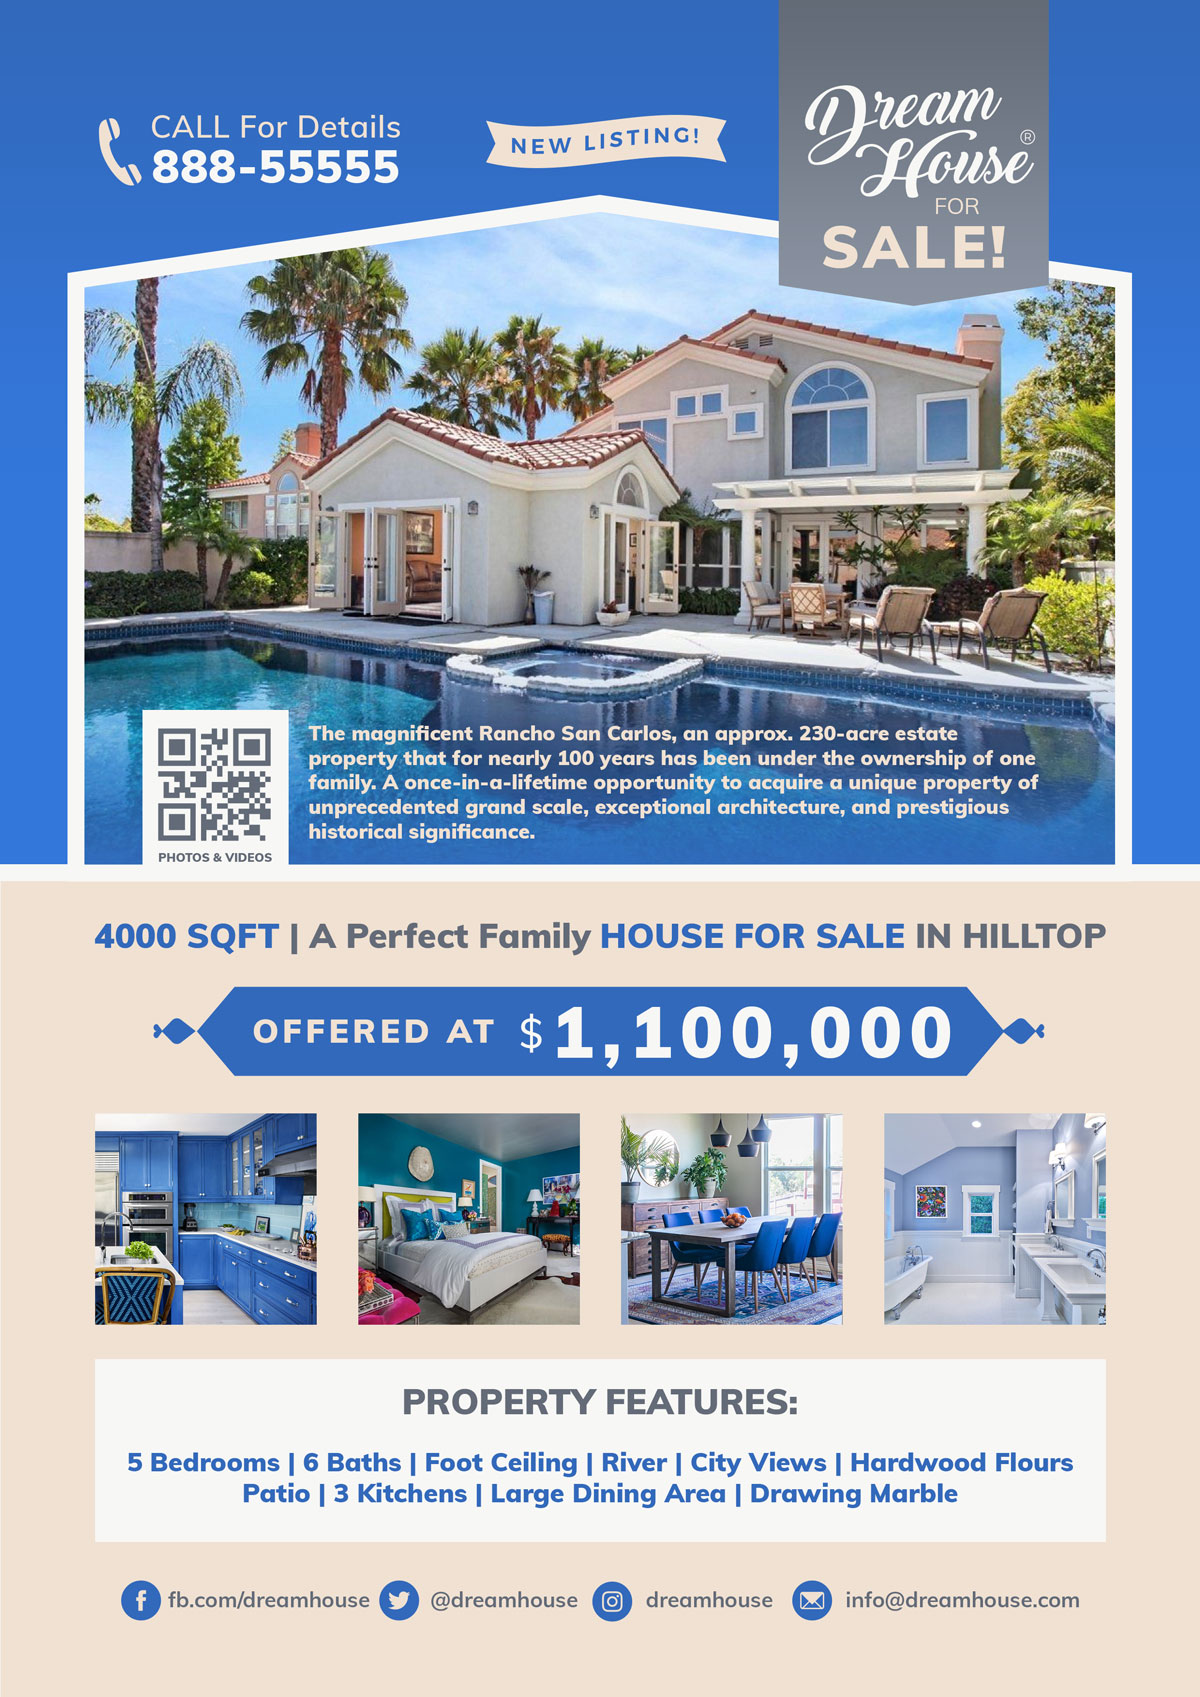 Free Real Estate / House for Sale Flyer Template in PSD - Designbolts Regarding House For Sale Flyer Template